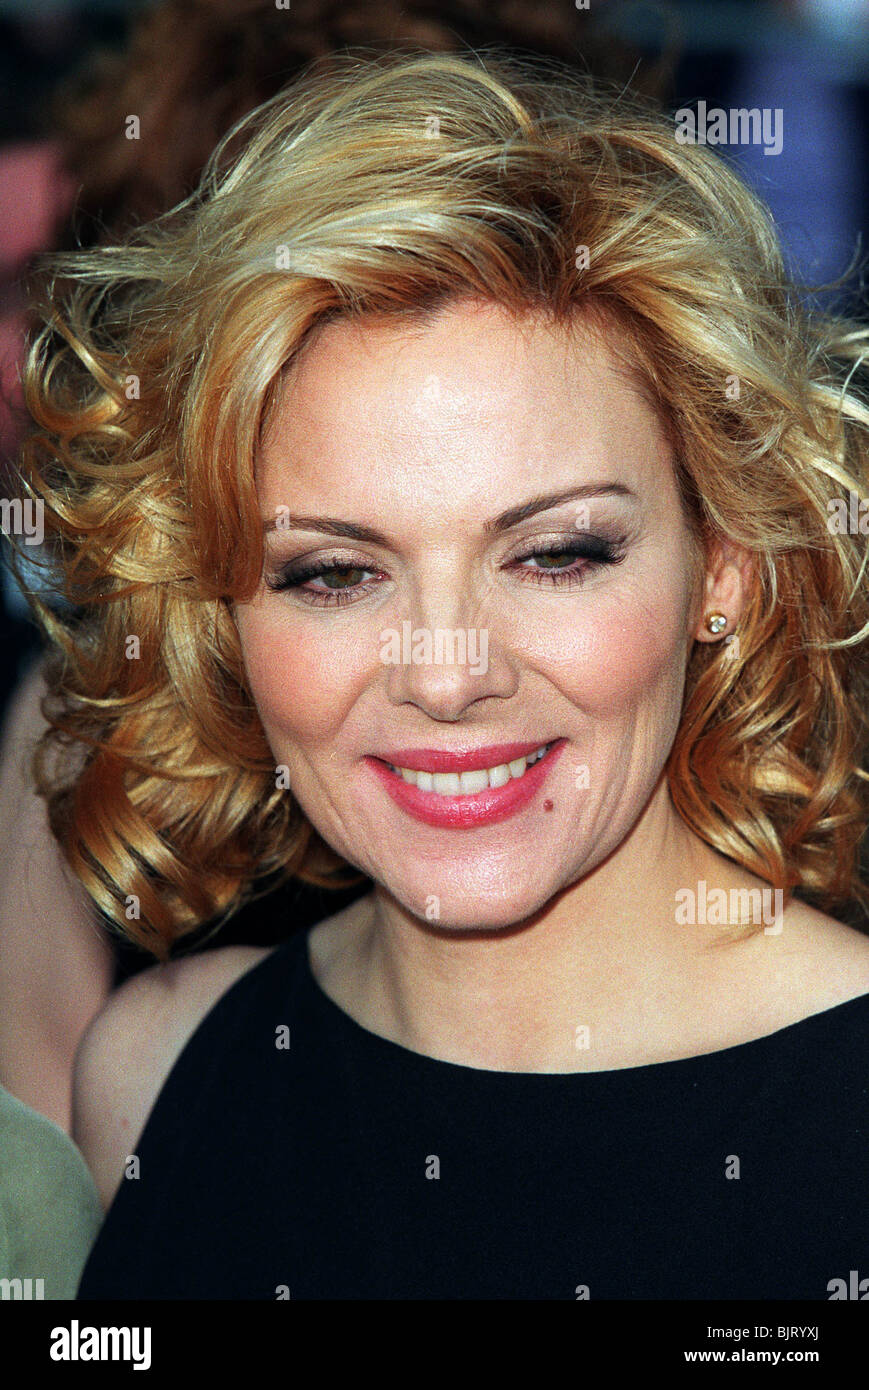 KIM CATTRALL SCREEN ACTORS GUILD AWARDS LOS ANGELES USA 11 March 2001 ...